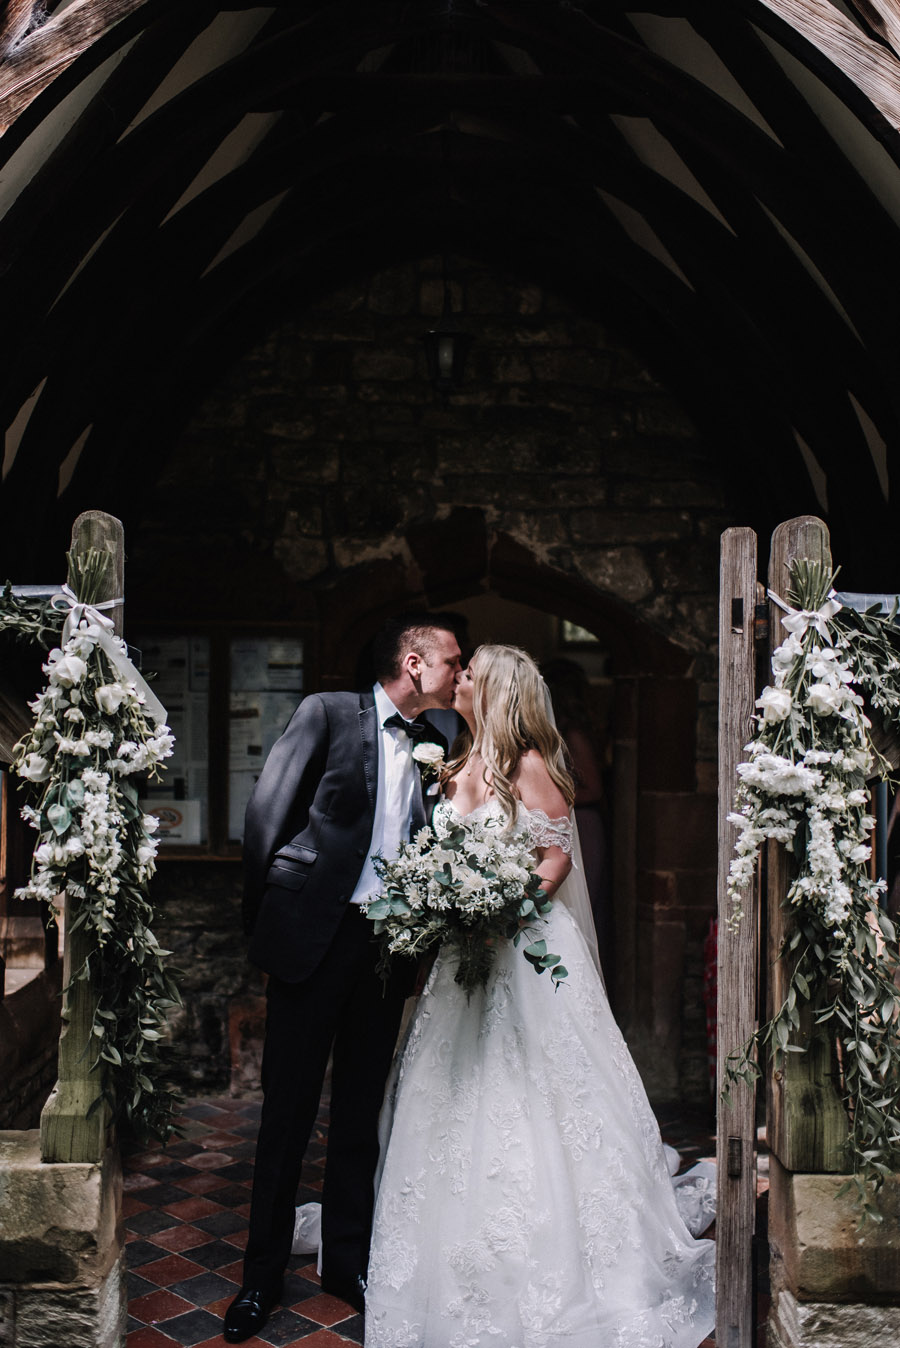 Whimsical wedding at Birtsmorton Court with beautiful photography by Oobaloos (8)